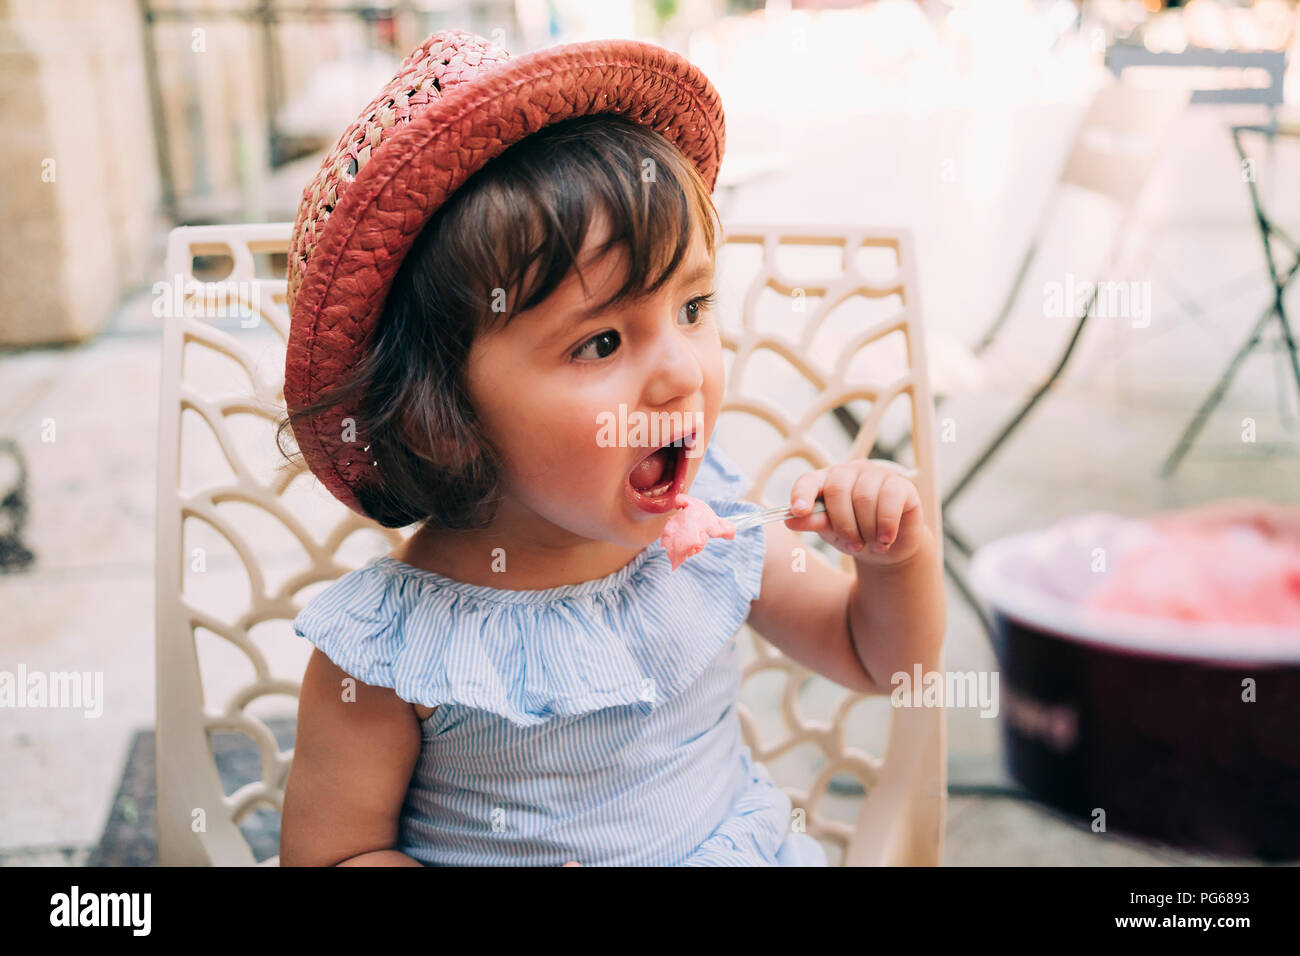 Cute toddler girl eating an ice cream on a terrace Stock Photo